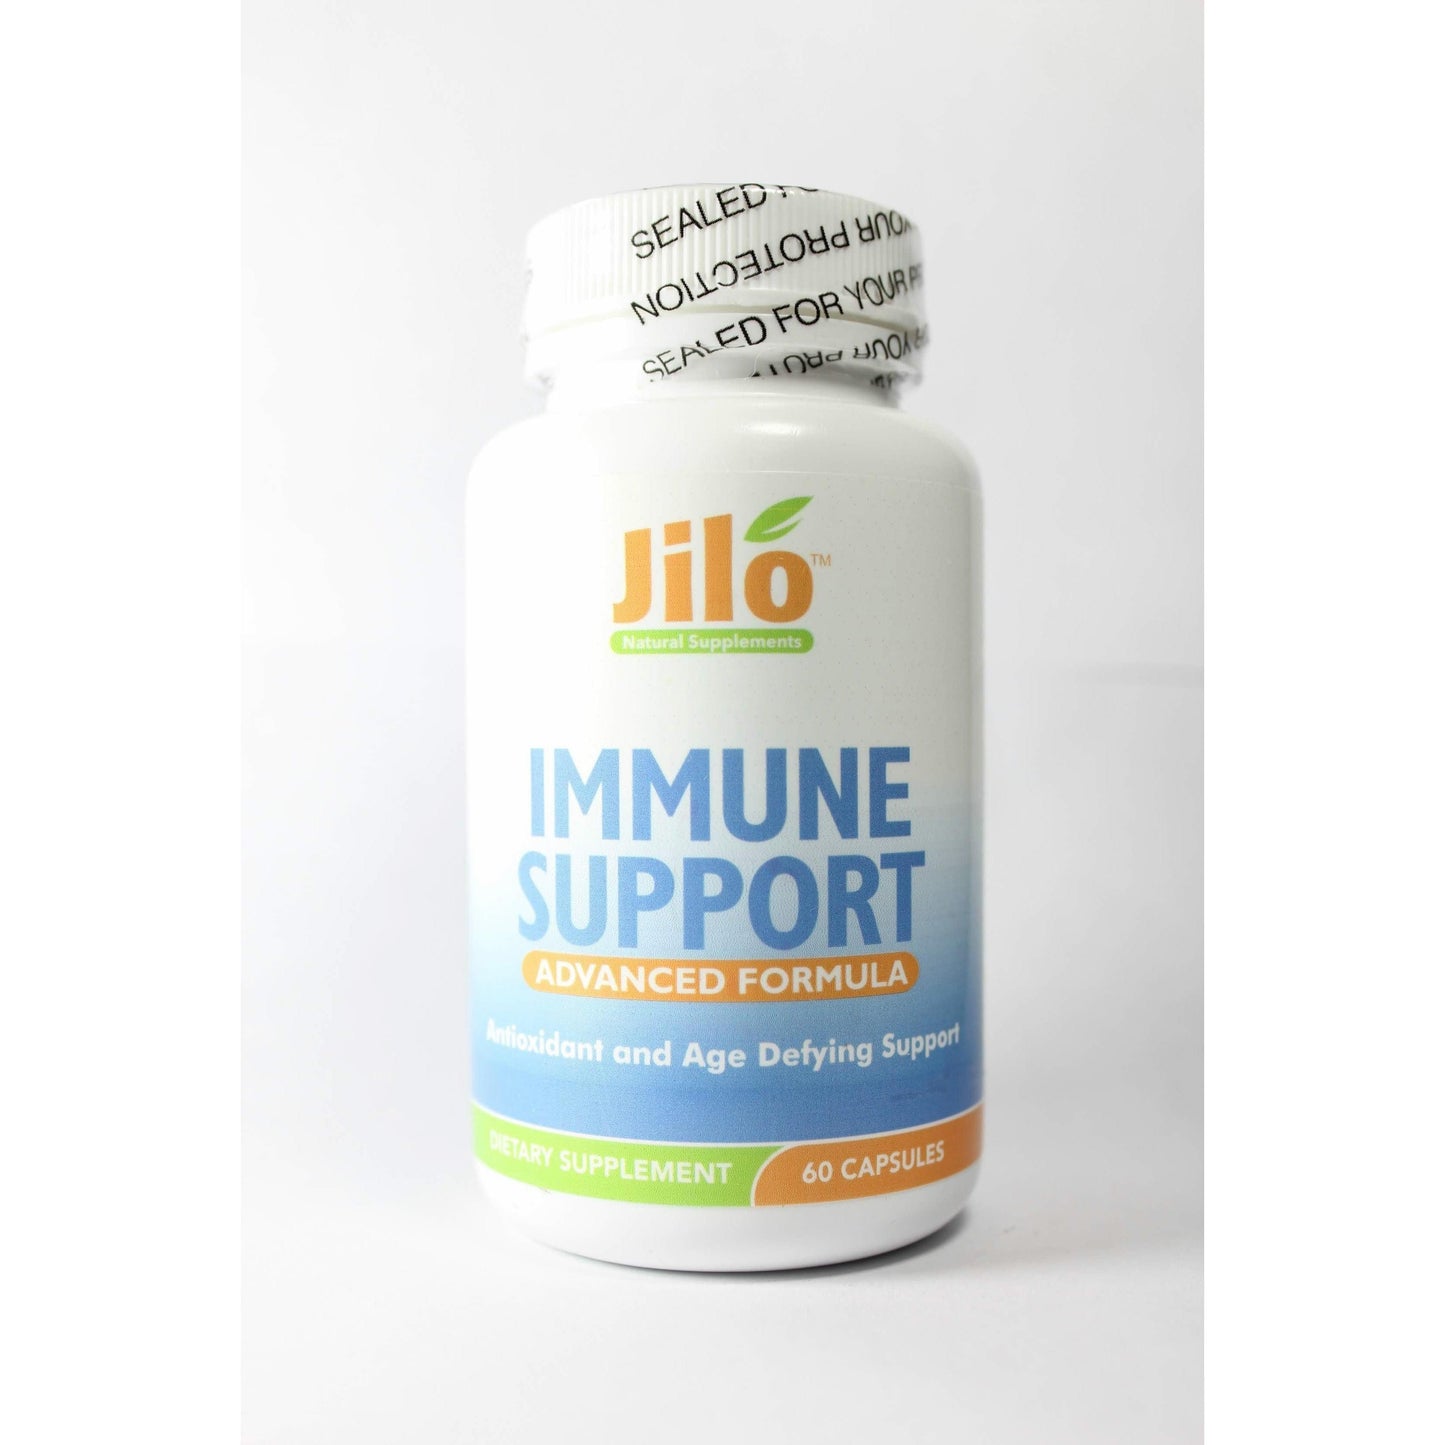 Immune Support -Antioxidant and Defying Support - The New You Recovery Kit